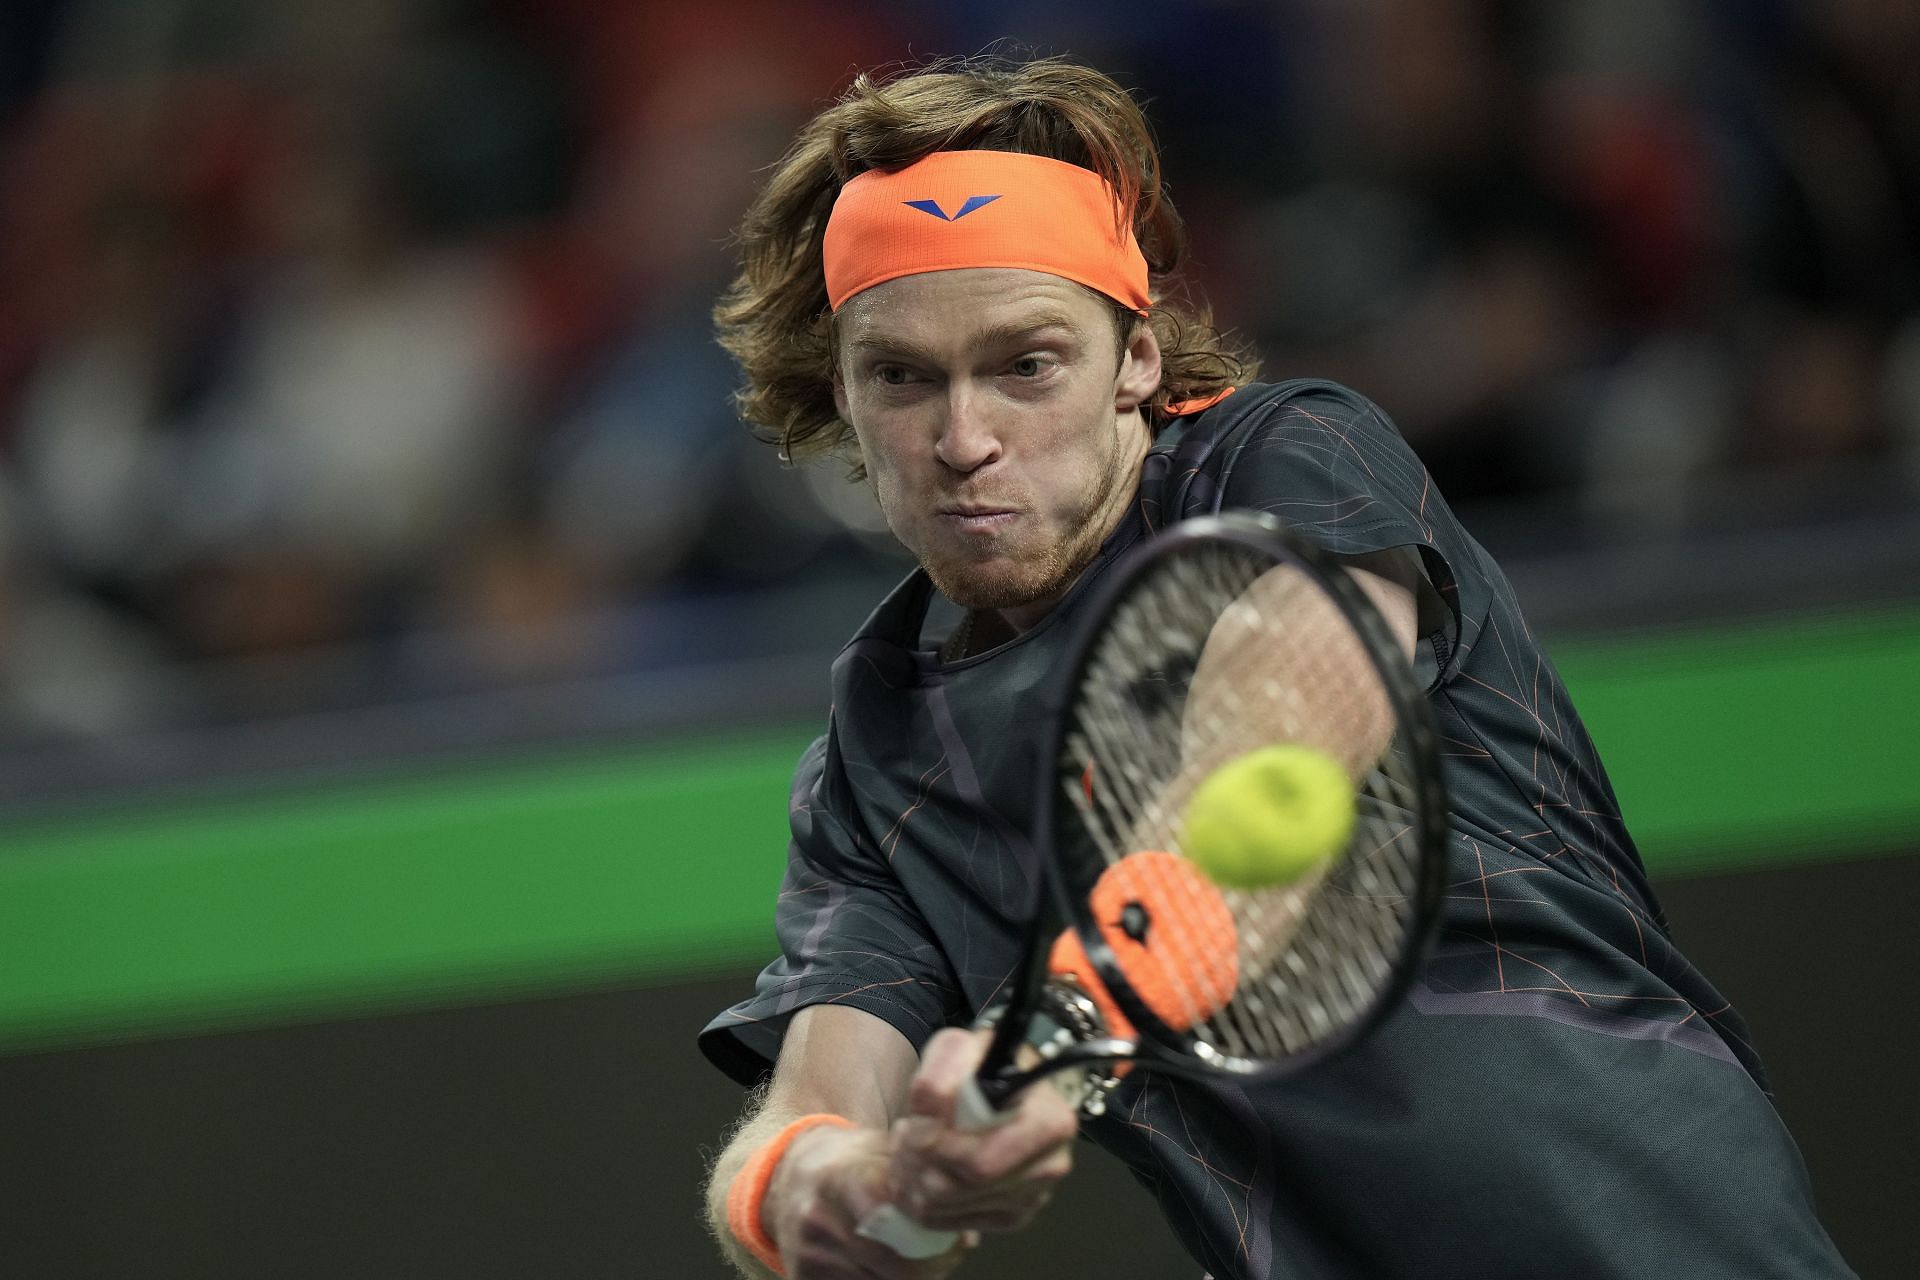 Andrey Rublev in action against Ugo Humbert in Shanghai